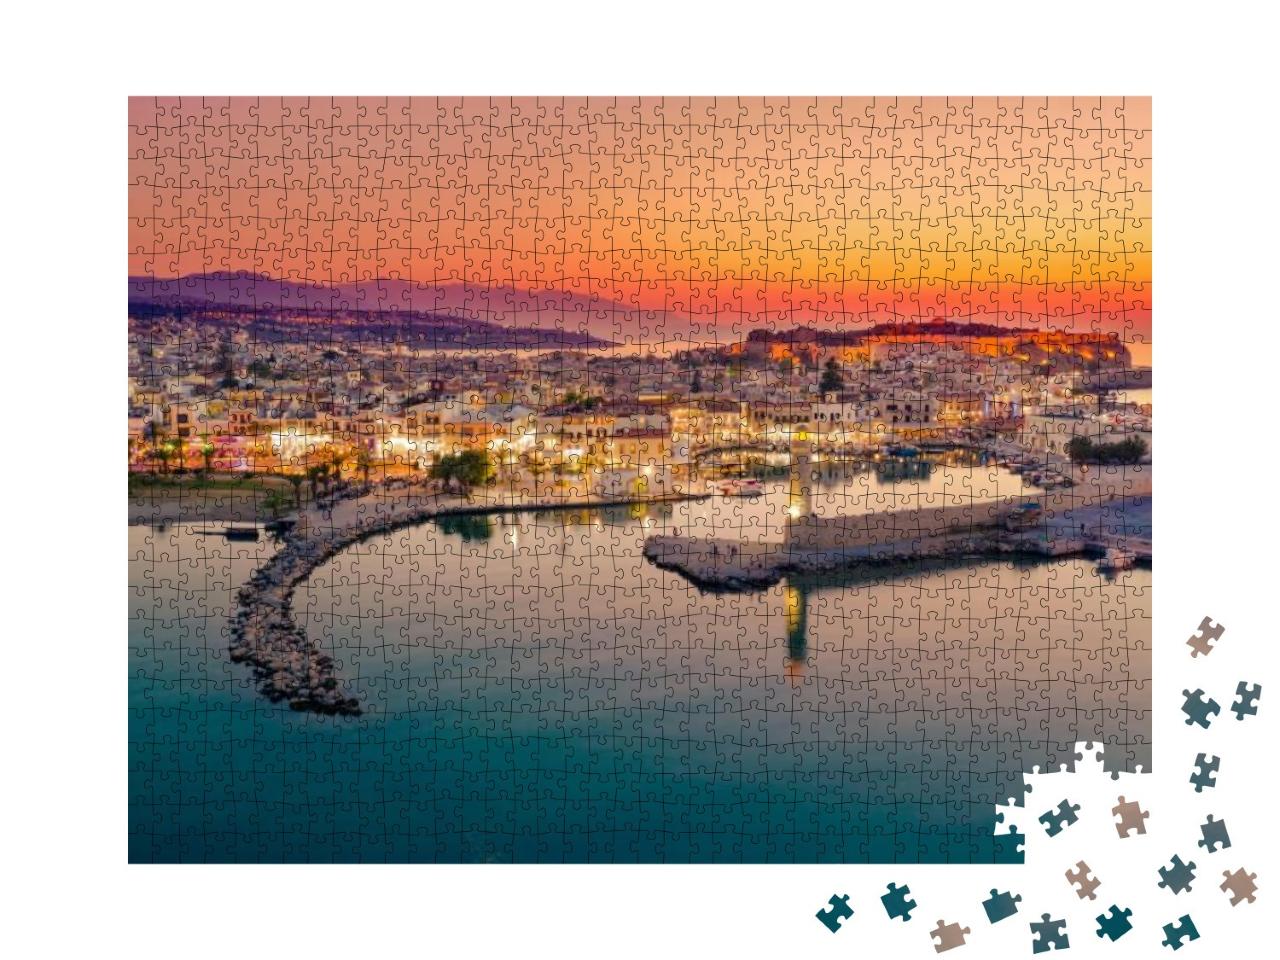 Rethymno City At Crete Island in Greece. the Old Venetian... Jigsaw Puzzle with 1000 pieces